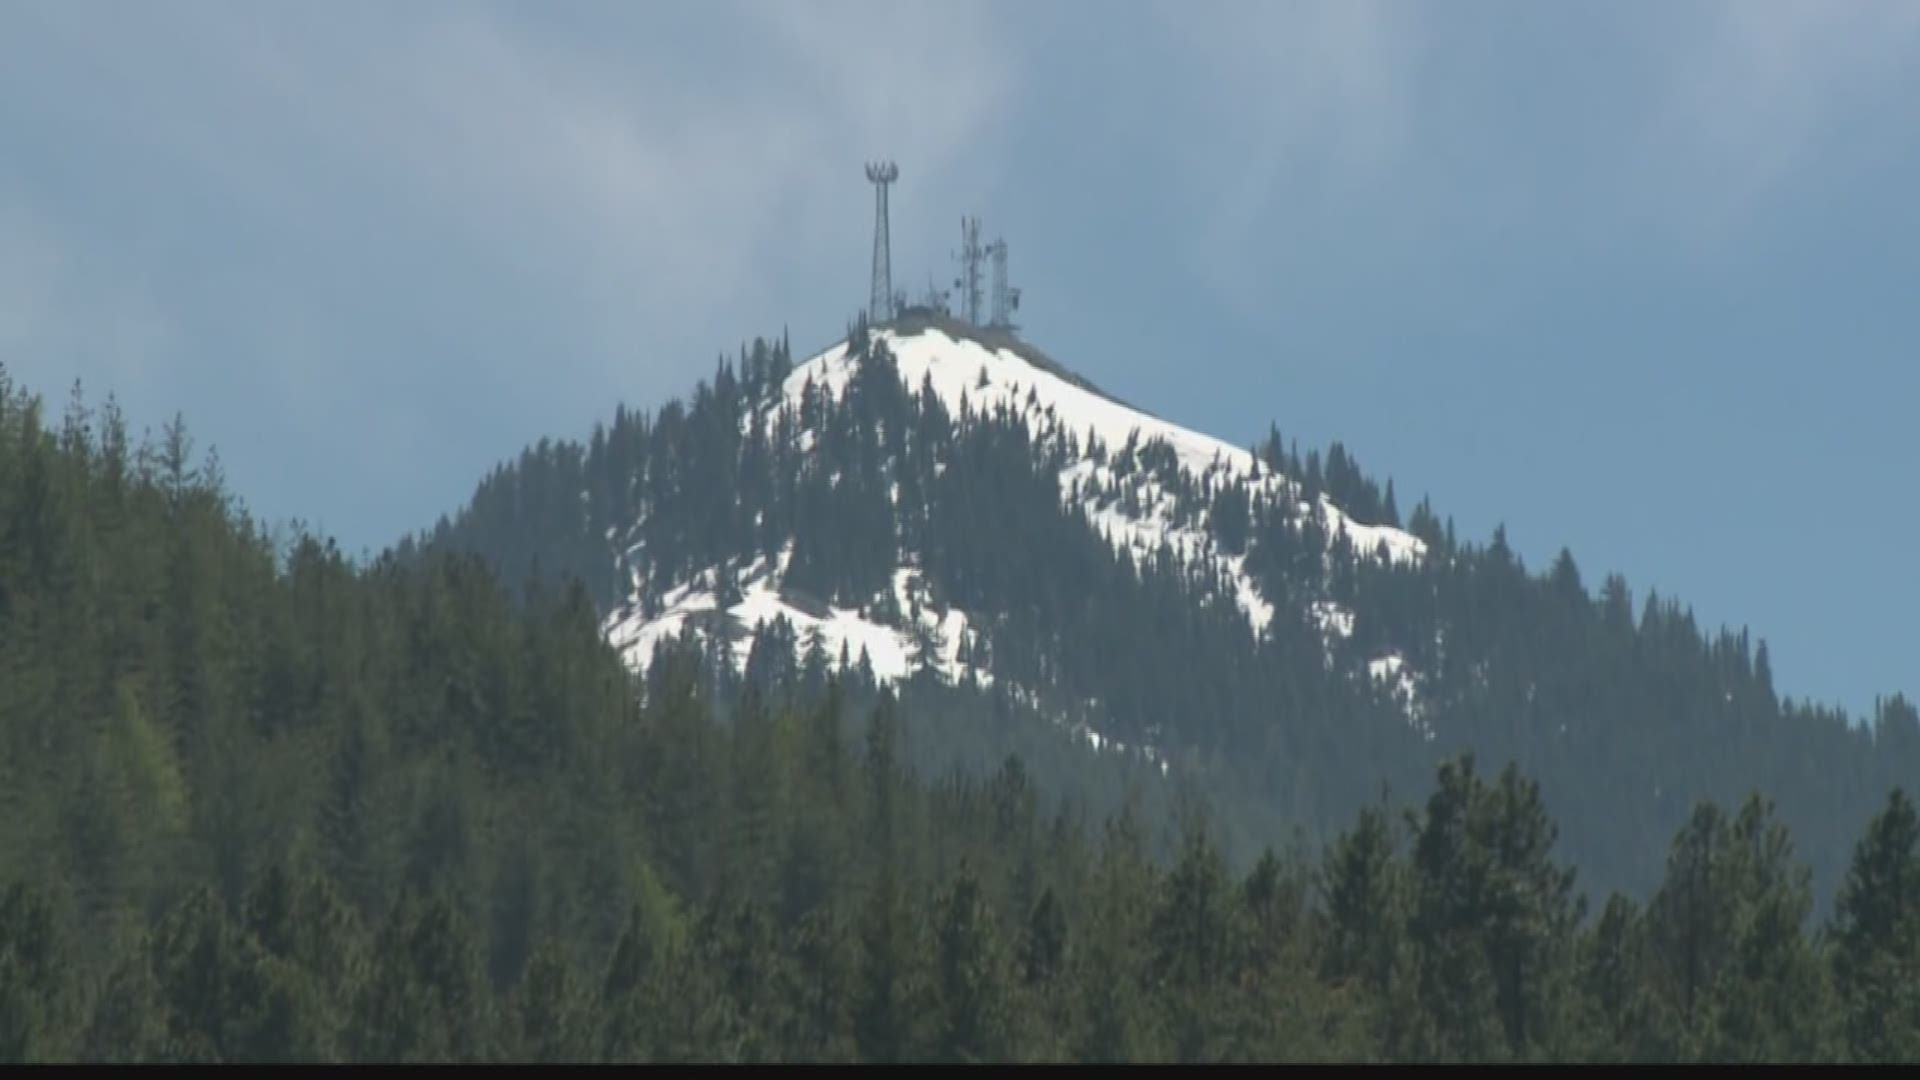 For the First time in a decade, Silver Mountain will be ready for skiers and boarders during memorial day weekend.